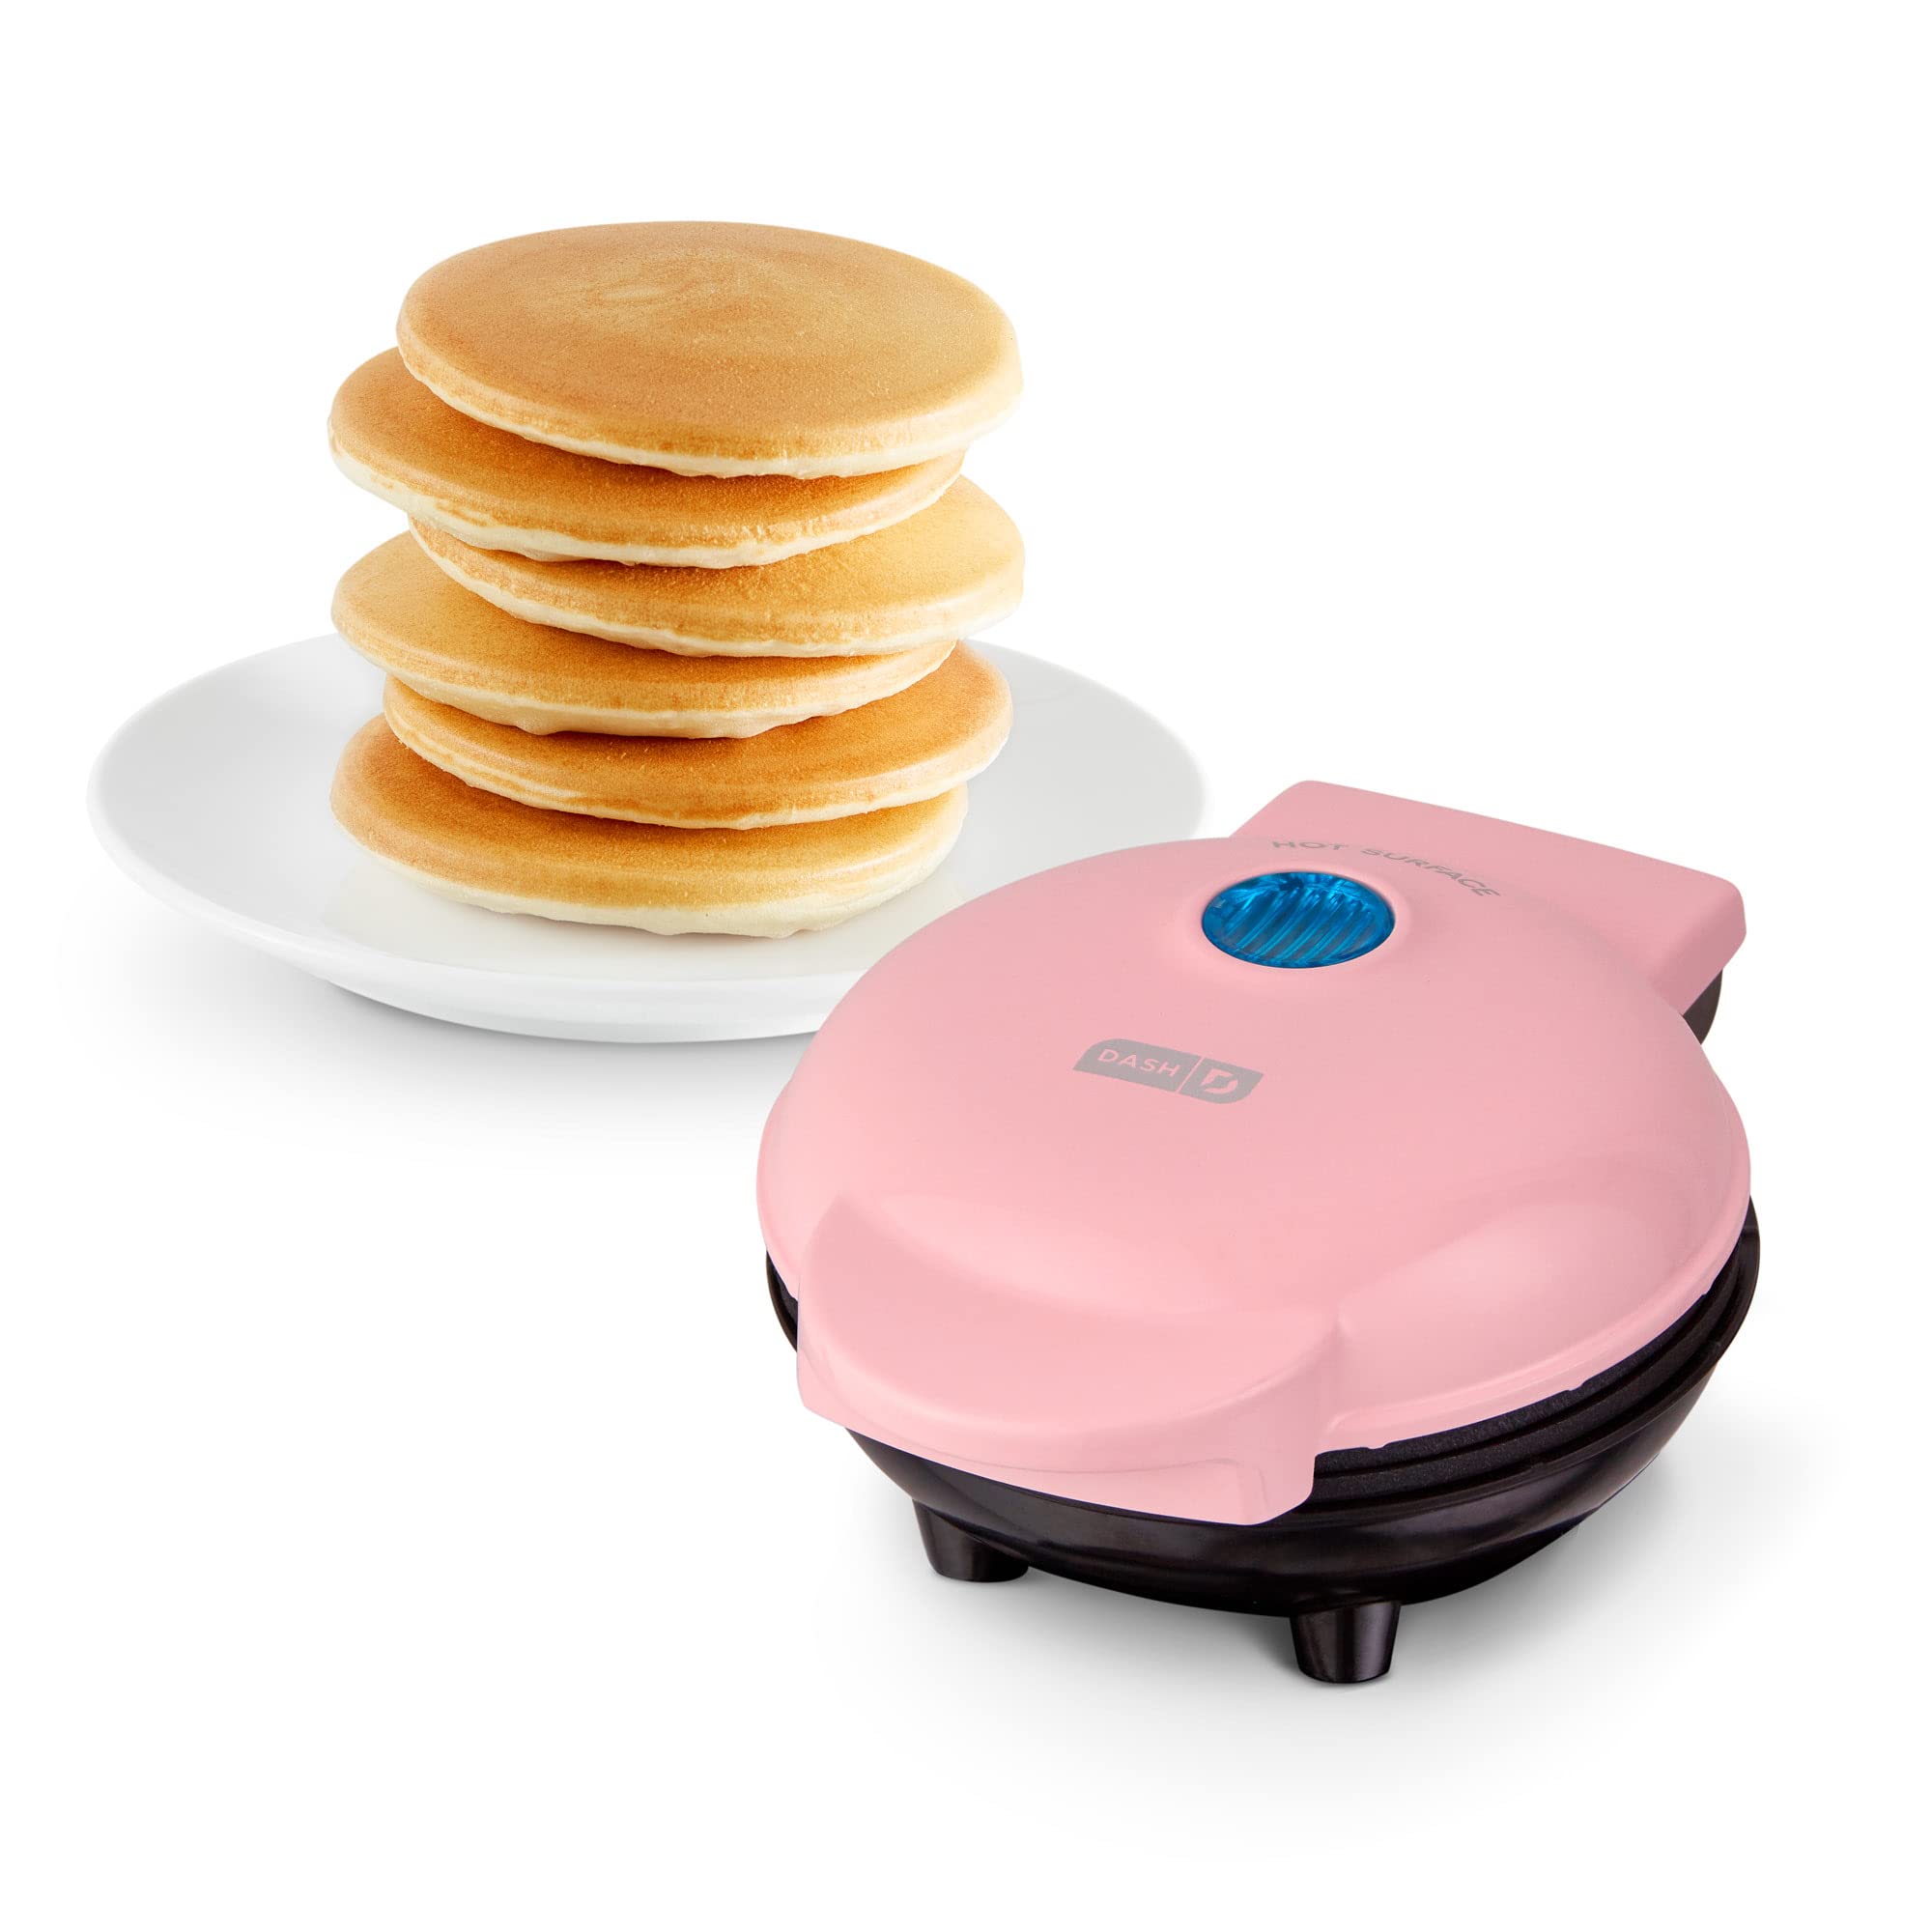 DASH Mini Maker Electric Round Griddle for Individual Pancakes, Cookies, Eggs & other on the go Breakfast, Lunch & Snacks with Indicator Light + Included Recipe Book - Pink